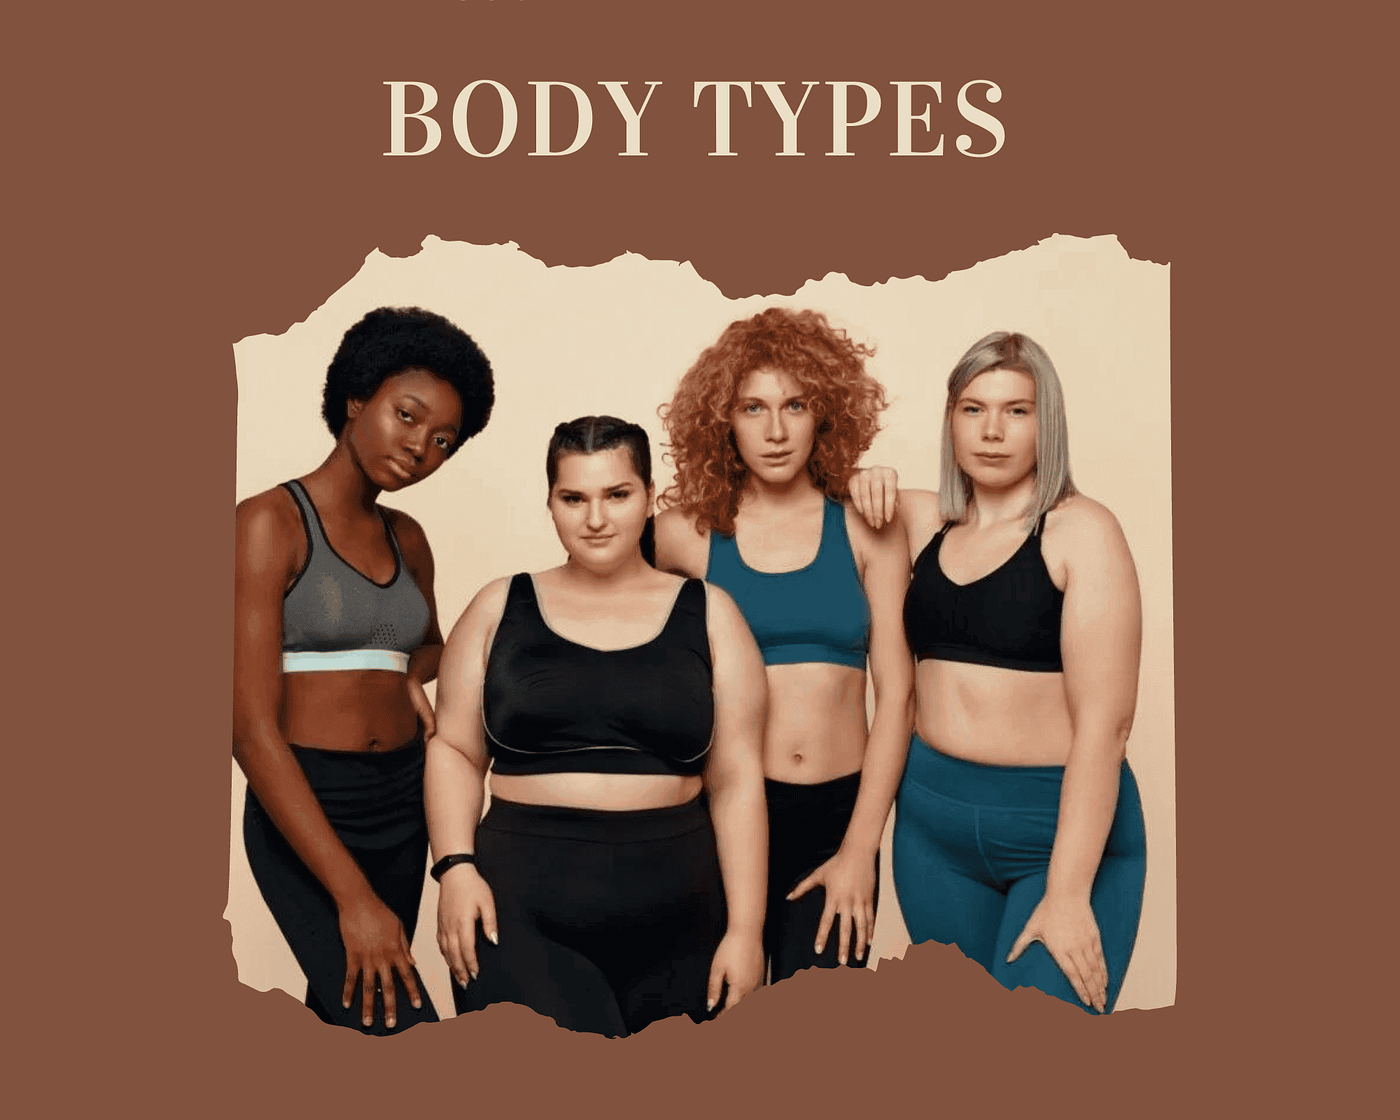 5 Most Common Types of Body Shapes & Their Complete Dressing Guide